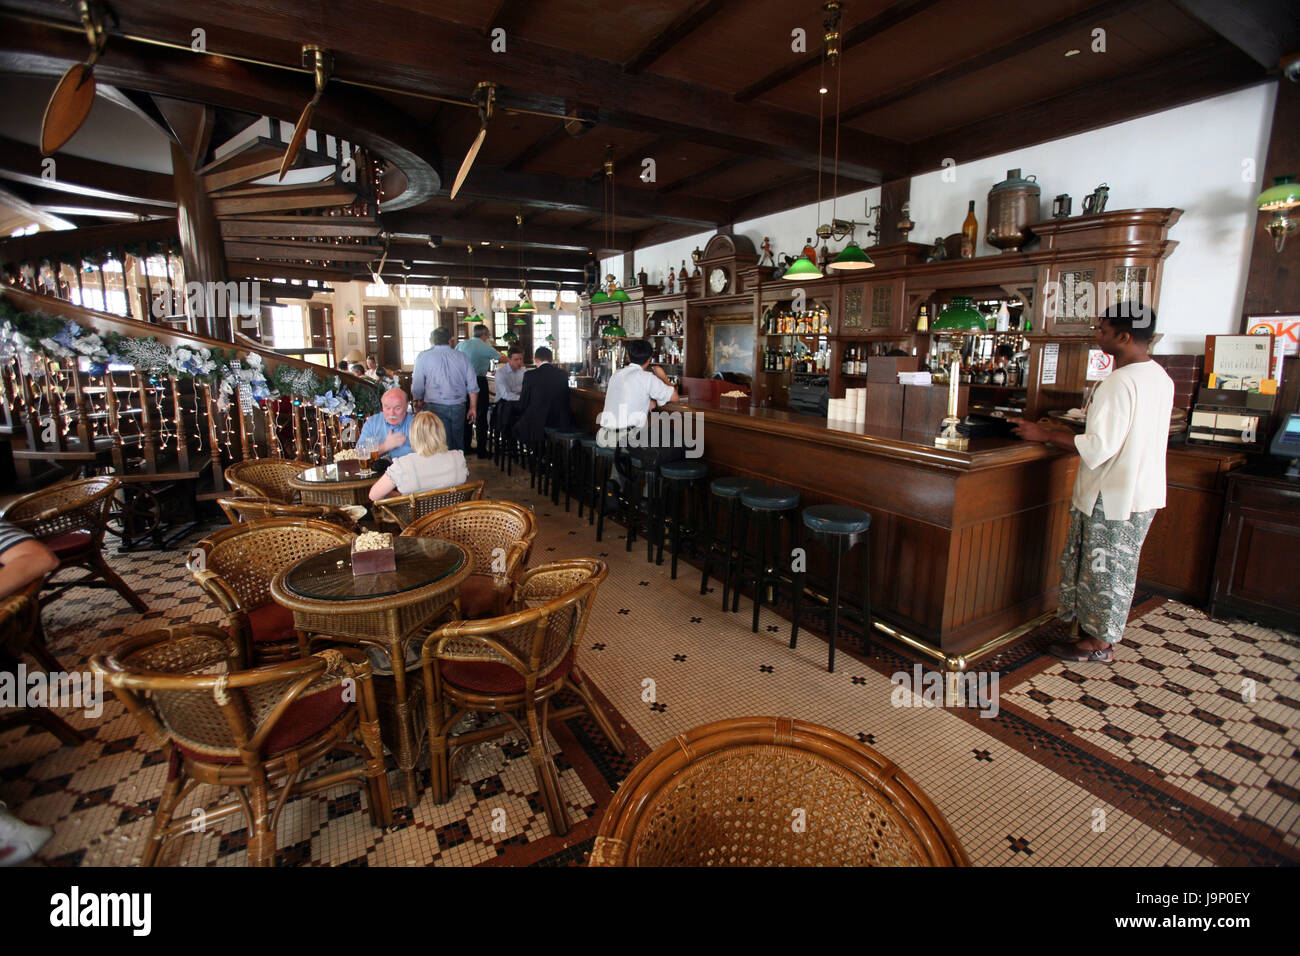 Singapore,island,town,restaurant,hotel,bar,architecture,Colonial,Raffles,Long Bar,guests, Stock Photo